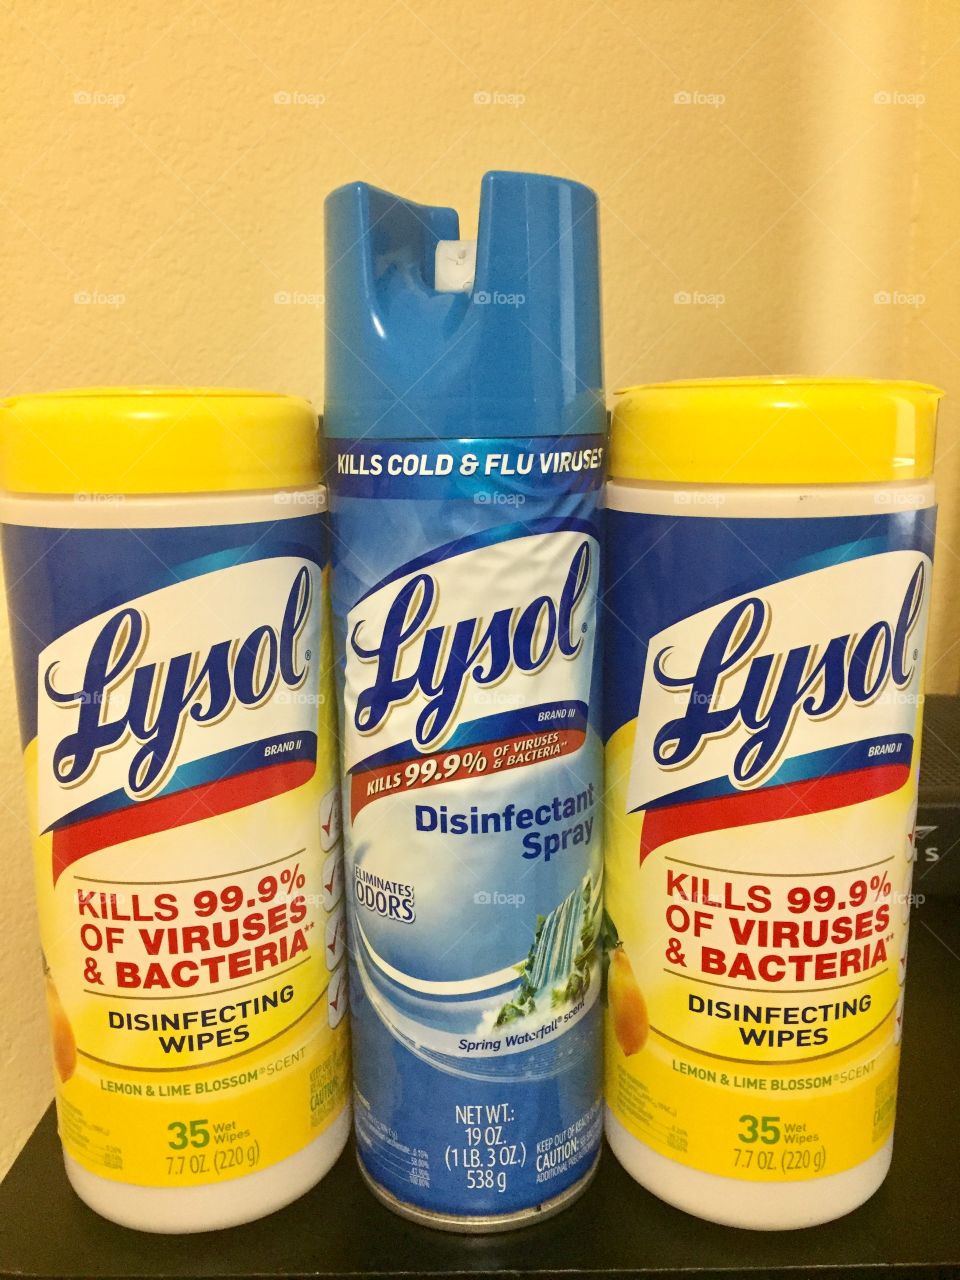 Clean, disinfect and refresh.  What better way than Lysol?  Trusted products to keep the germs away!